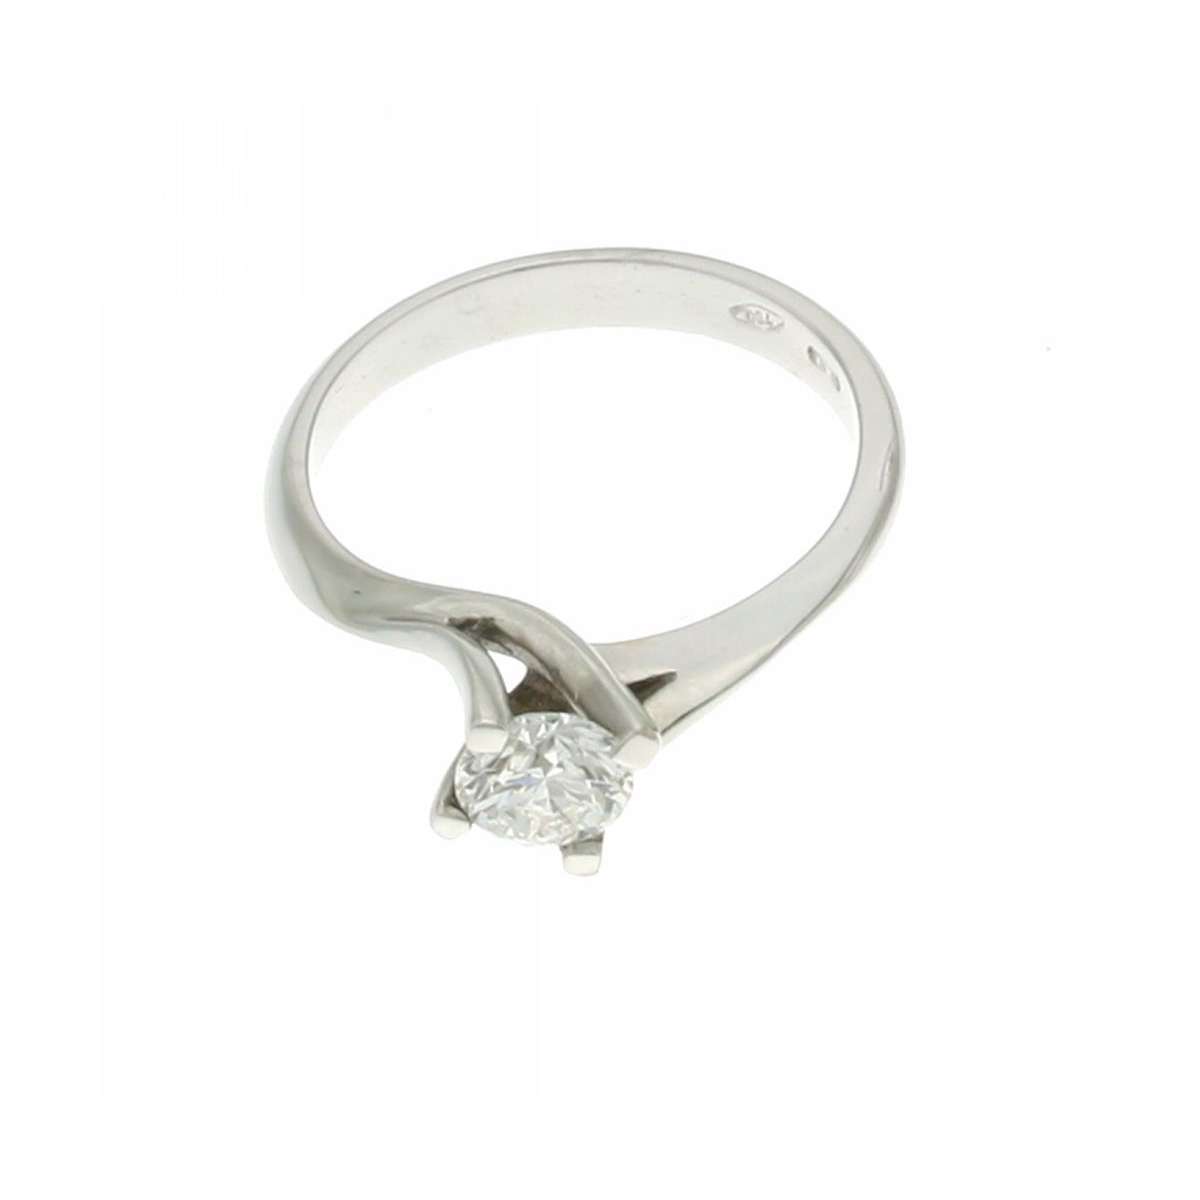 White gold solitaire diamond ring HRD certificate Antwerp carats 0.60 G color VS2 clarity